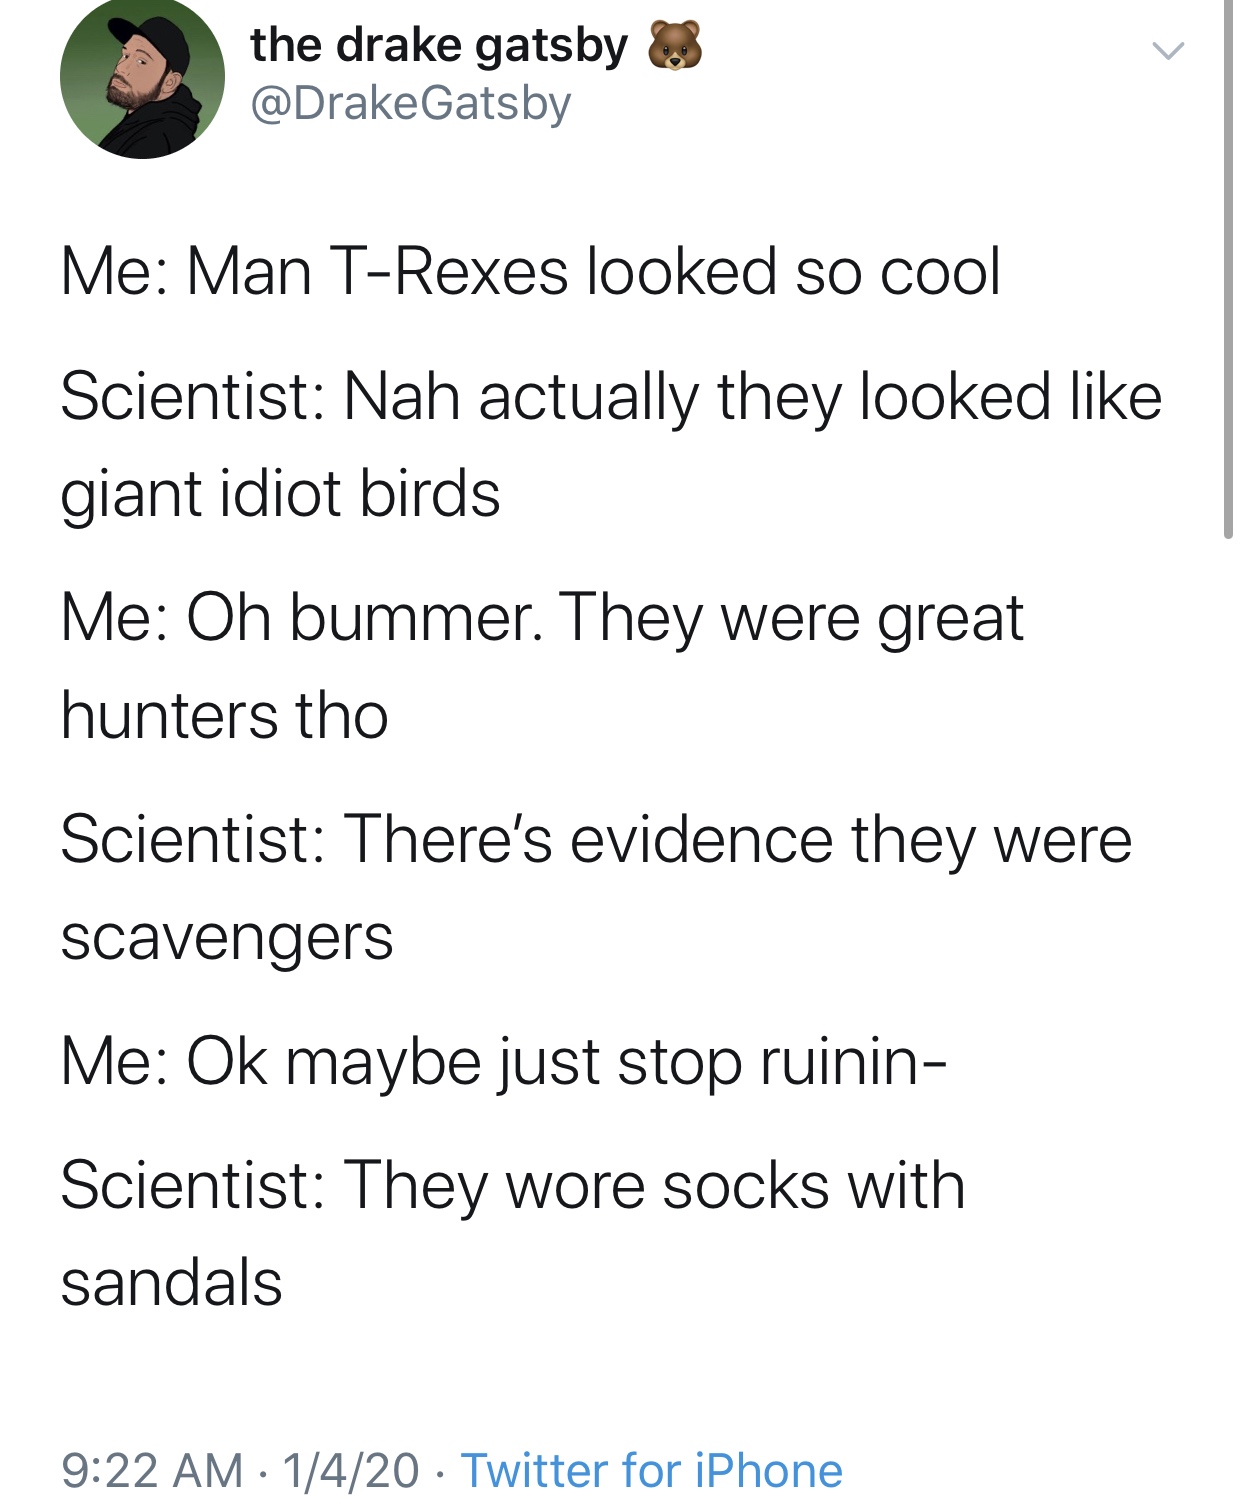 persassy memes - the drake gatsby Me Man TRexes looked so cool Scientist Nah actually they looked giant idiot birds Me Oh bummer. They were great hunters tho Scientist There's evidence they were scavengers Me Ok maybe just stop ruinin Scientist They wore 